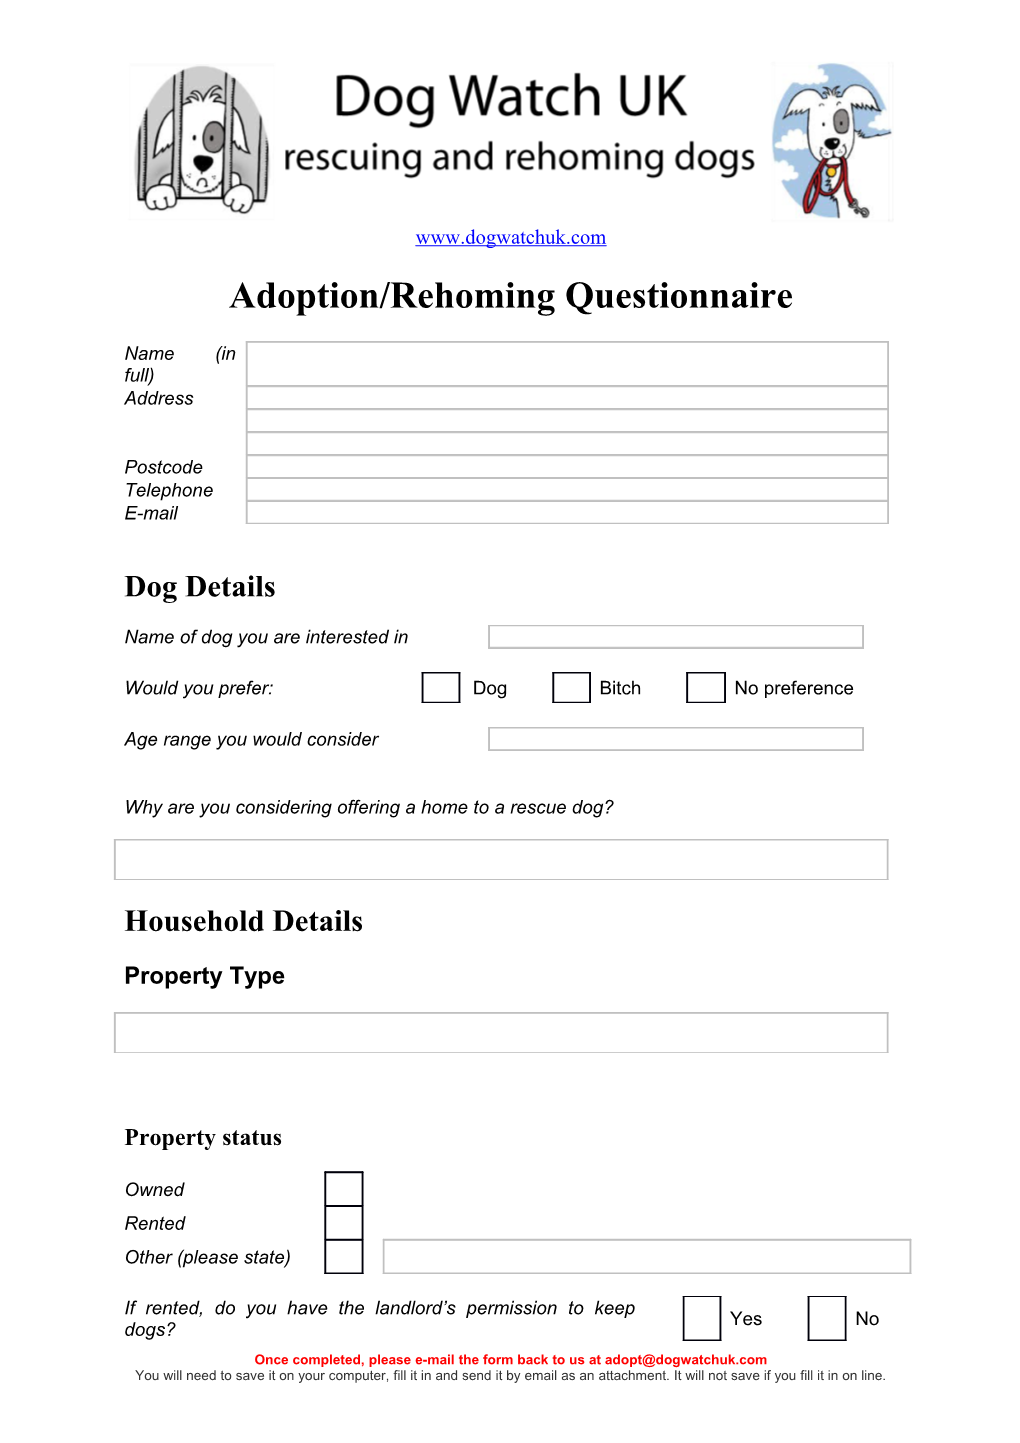 Adoption/Rehoming Questionnaire